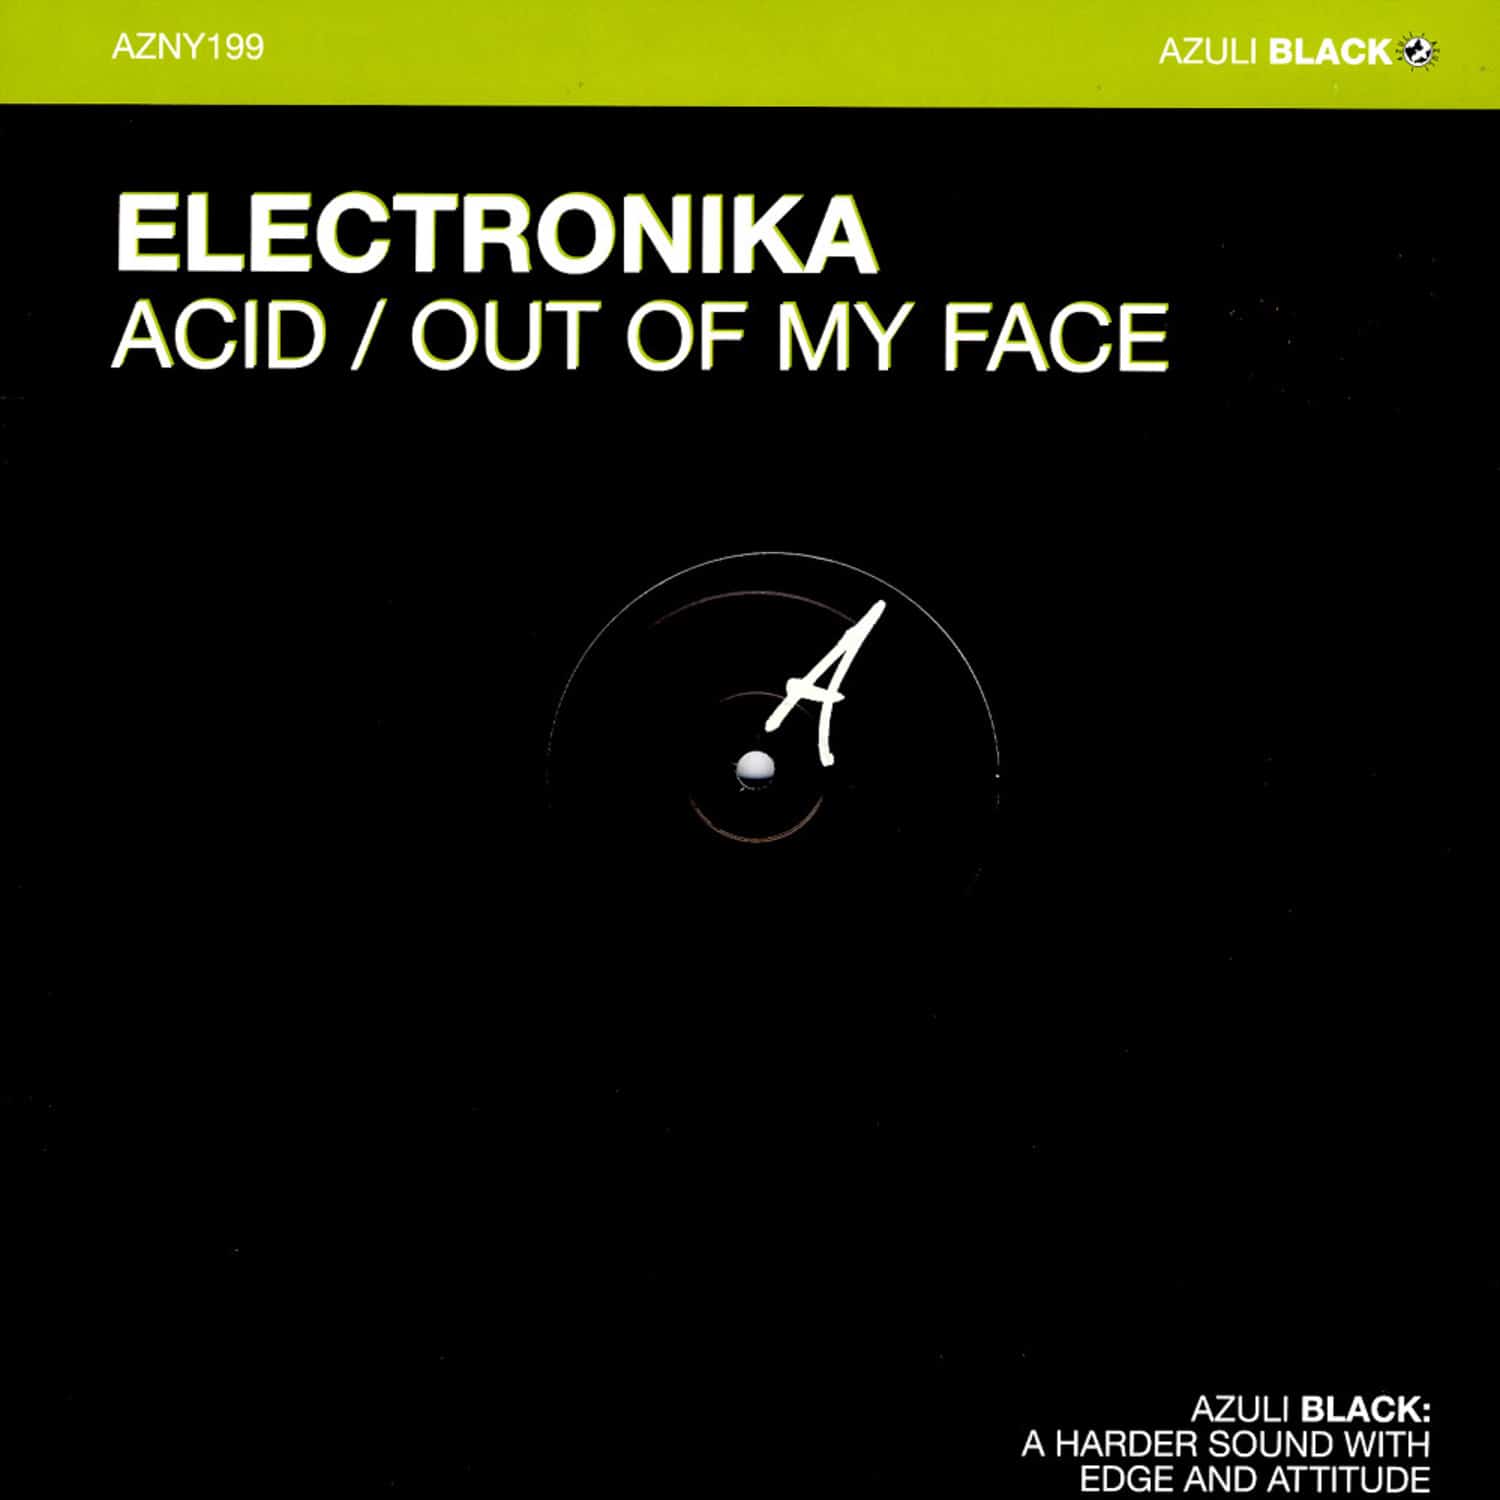 Electronika - ACID / OUT OF MY FACE